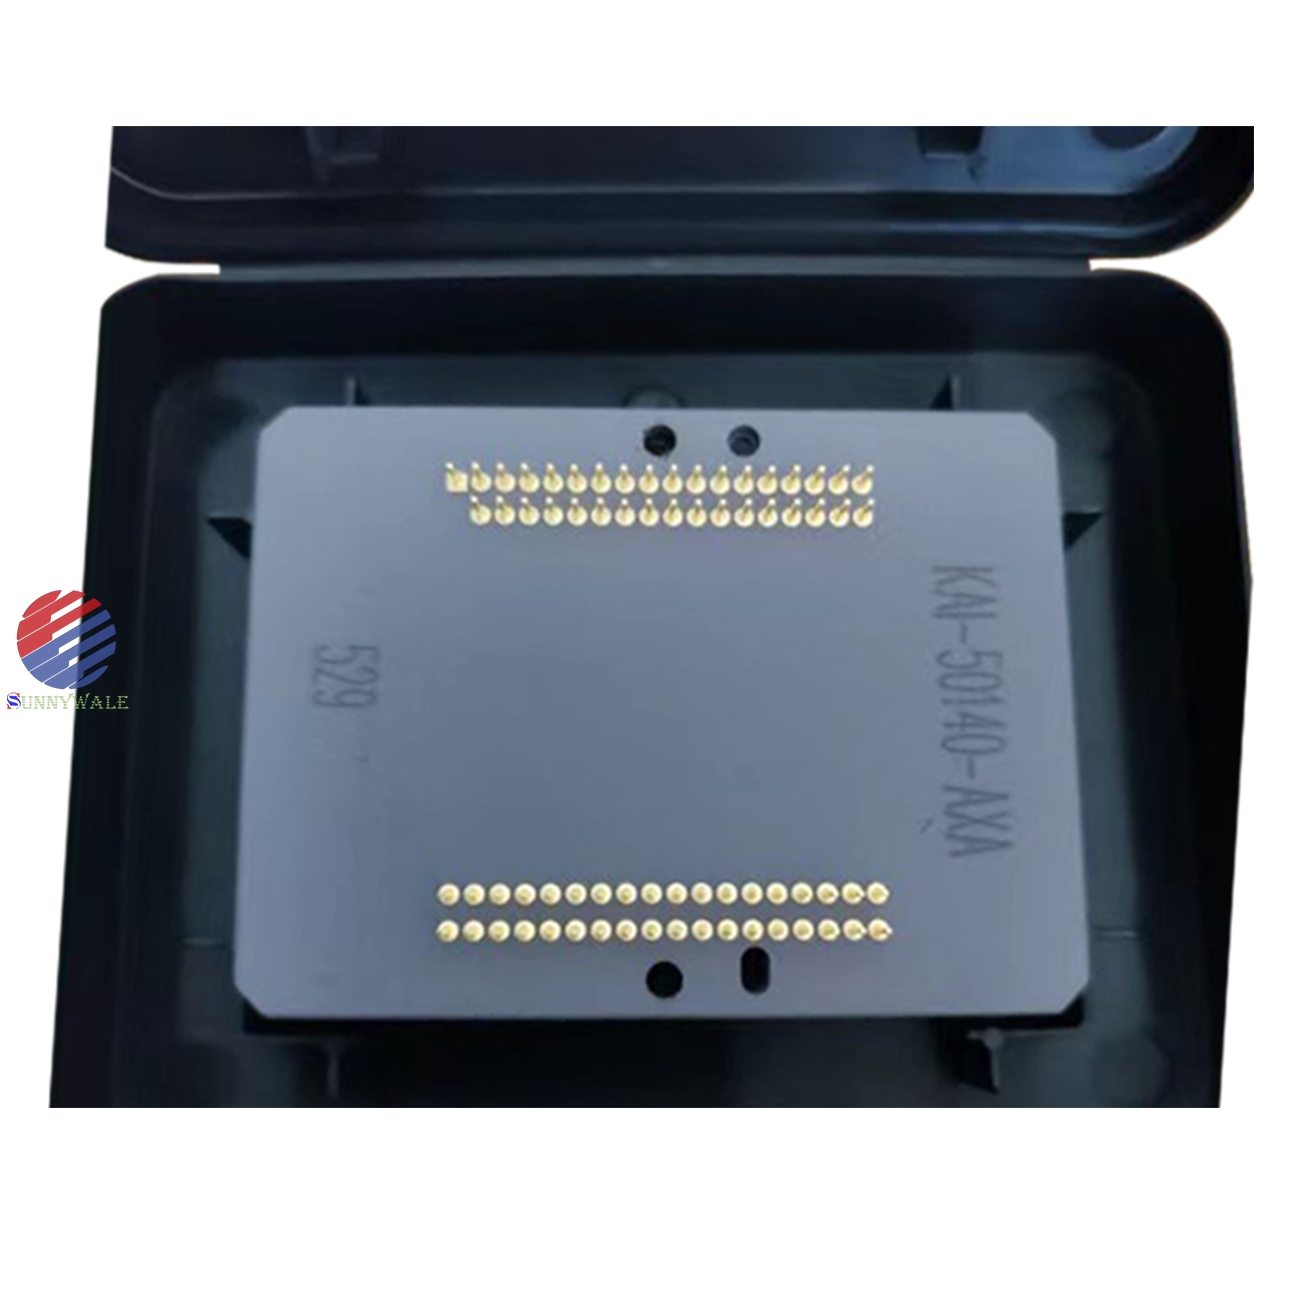 KAI-50140-AXA-JD-B1, black and white monochrome, ONSEMI CCD image sensor, width and height 2.18: 15 million pixels, 10480×4840@4fps, used for industrial camera，Large pixel unit，high pixel large size CCD